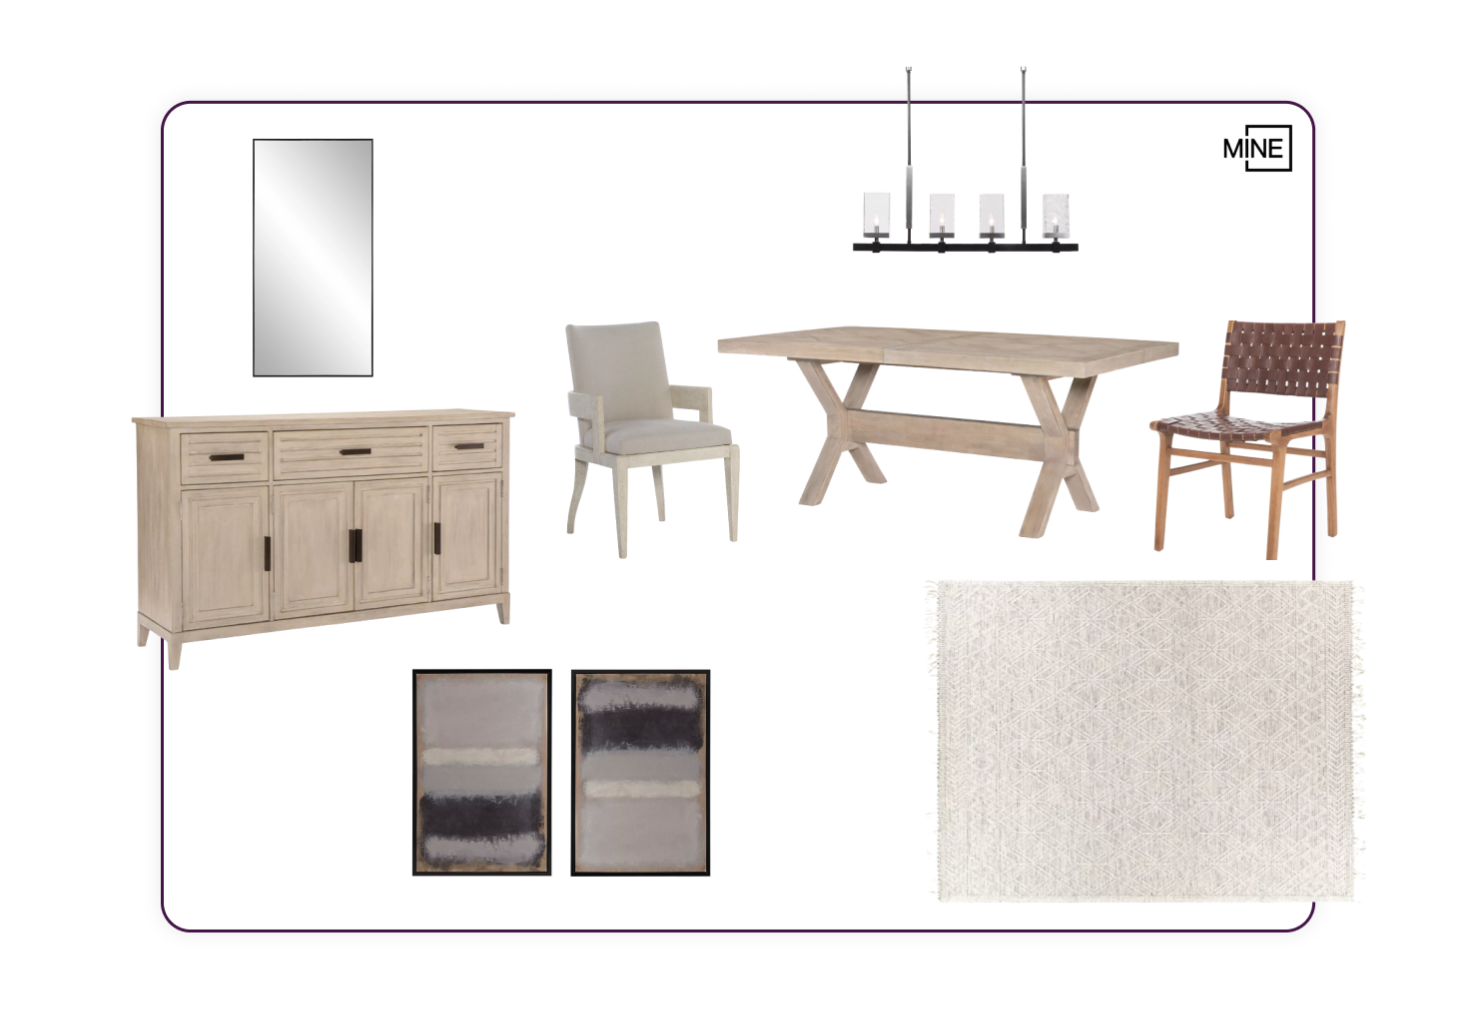 Dining room set collage with a table, pendants, chairs, wall art, cabinets, a mirror, and a rug